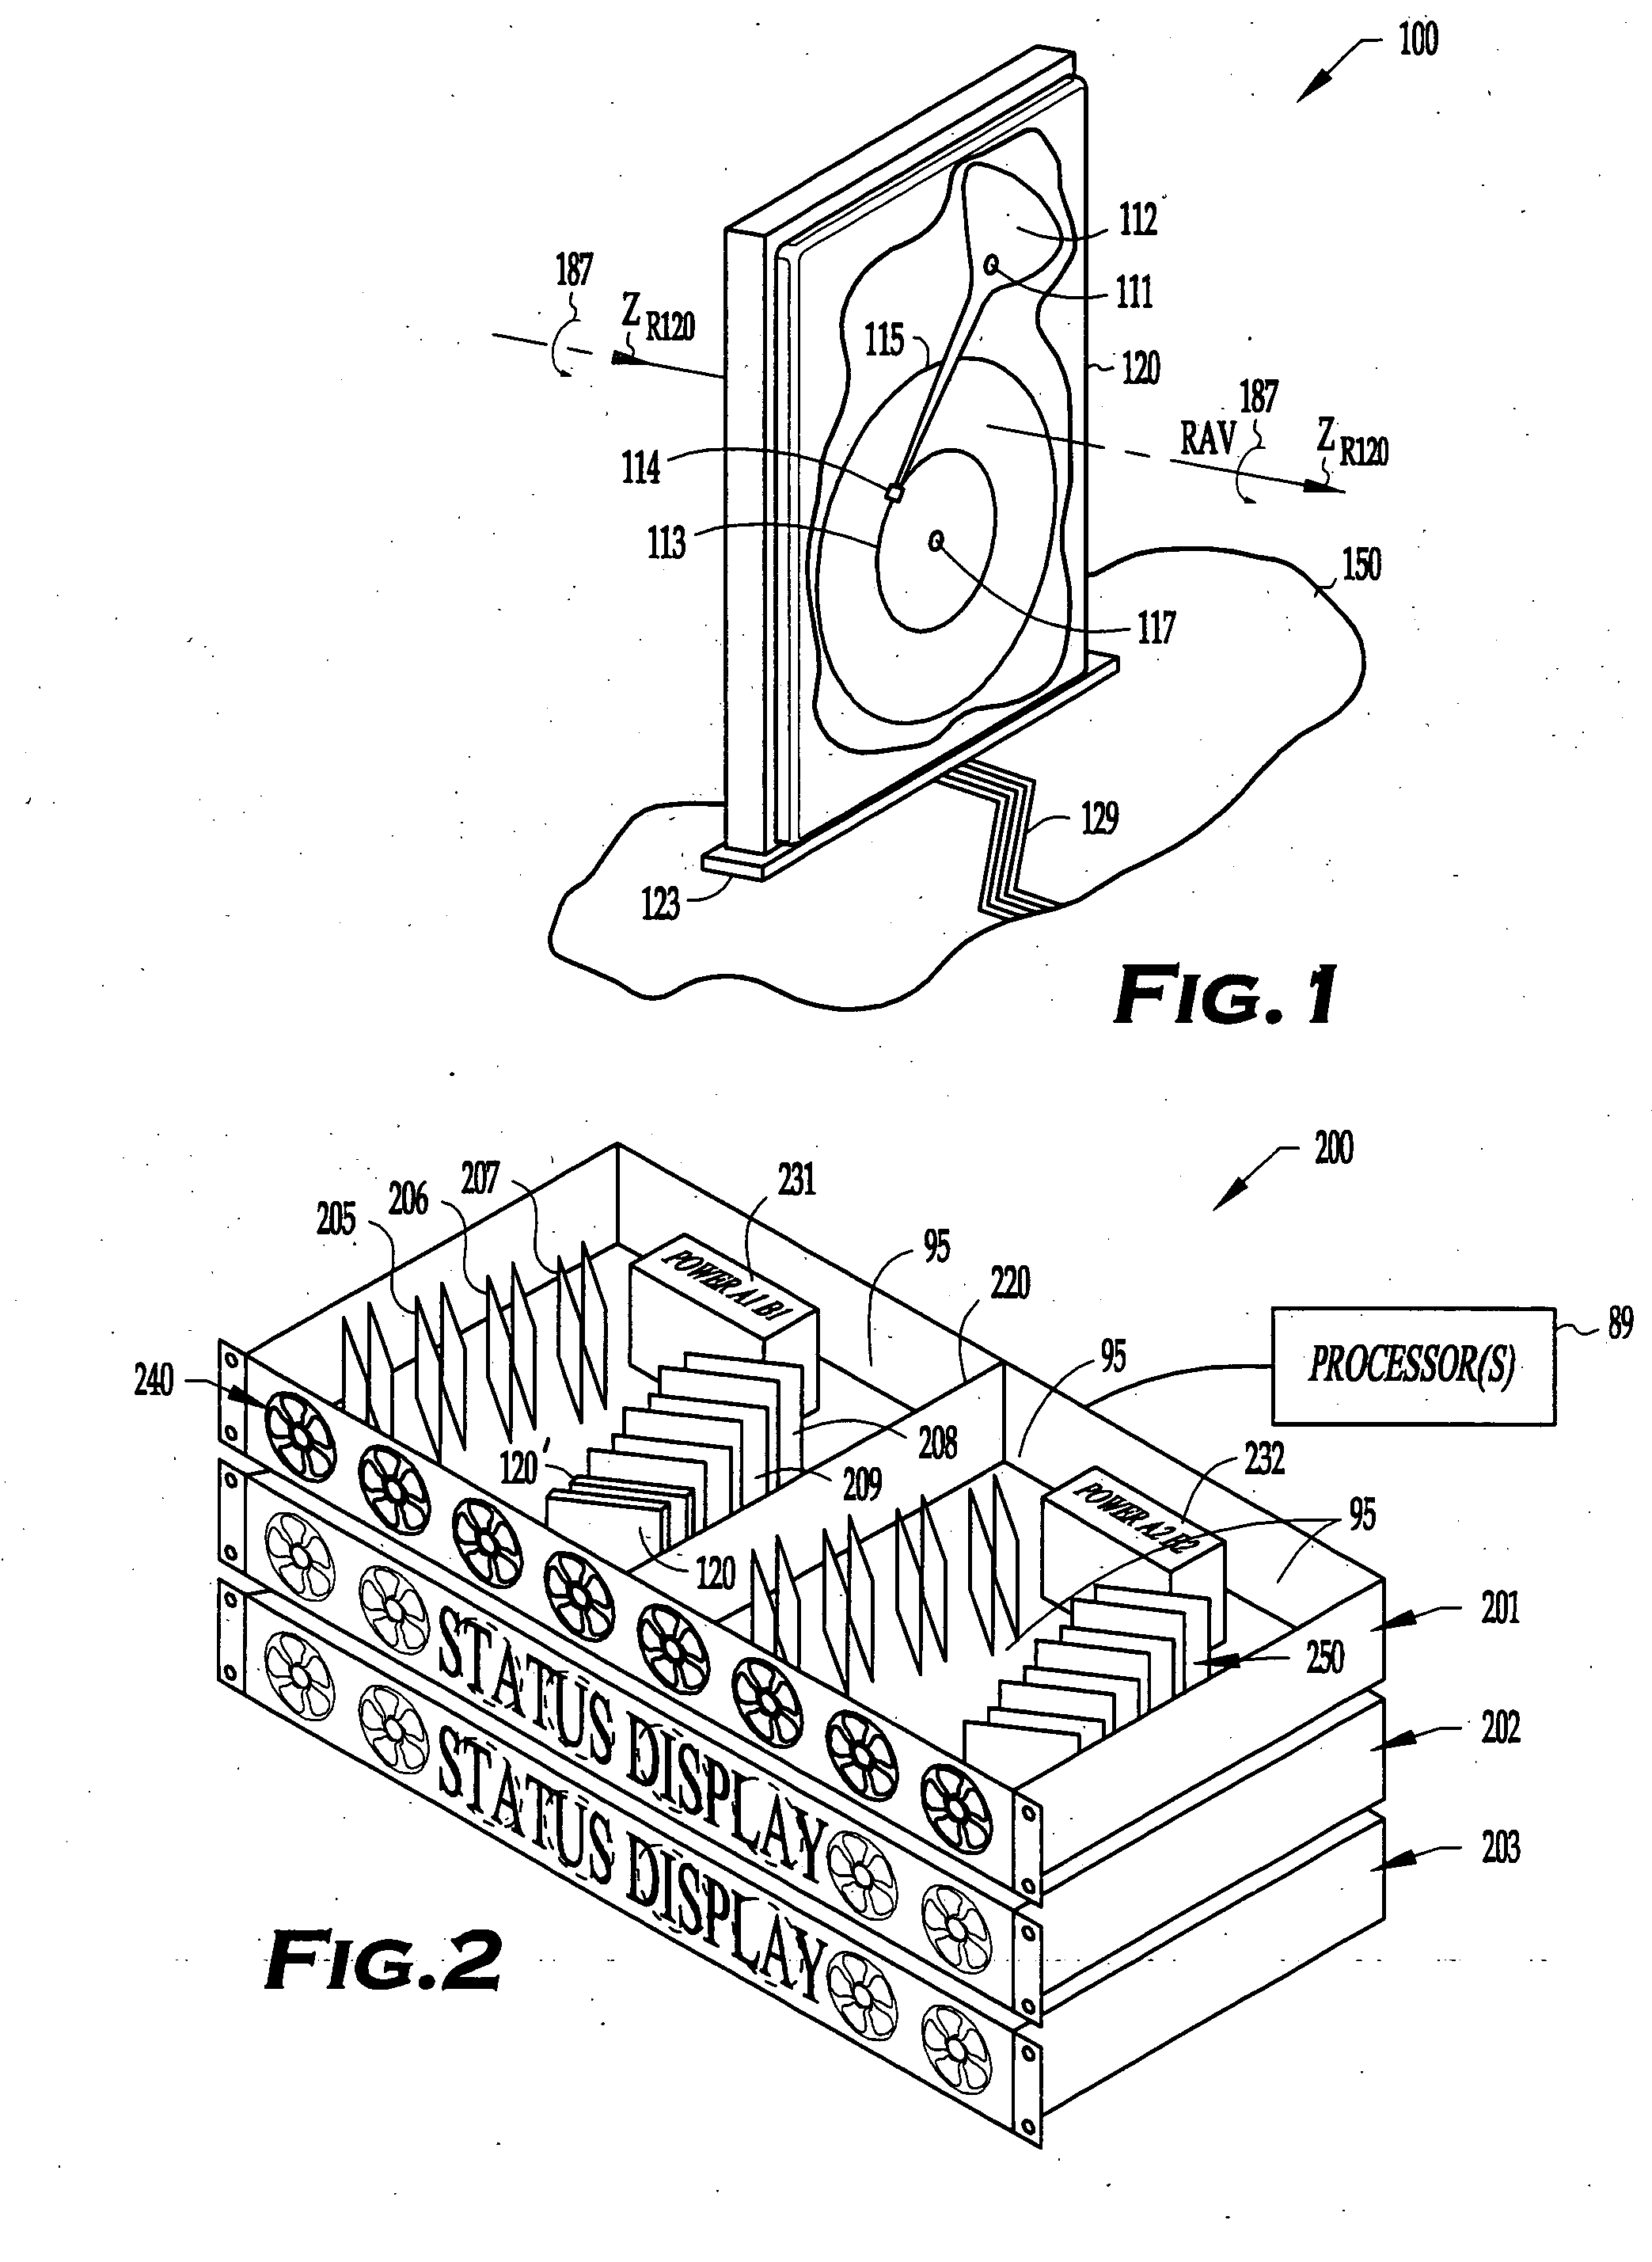 System and method for reduced vibration interaction in a multiple-disk-drive enclosure